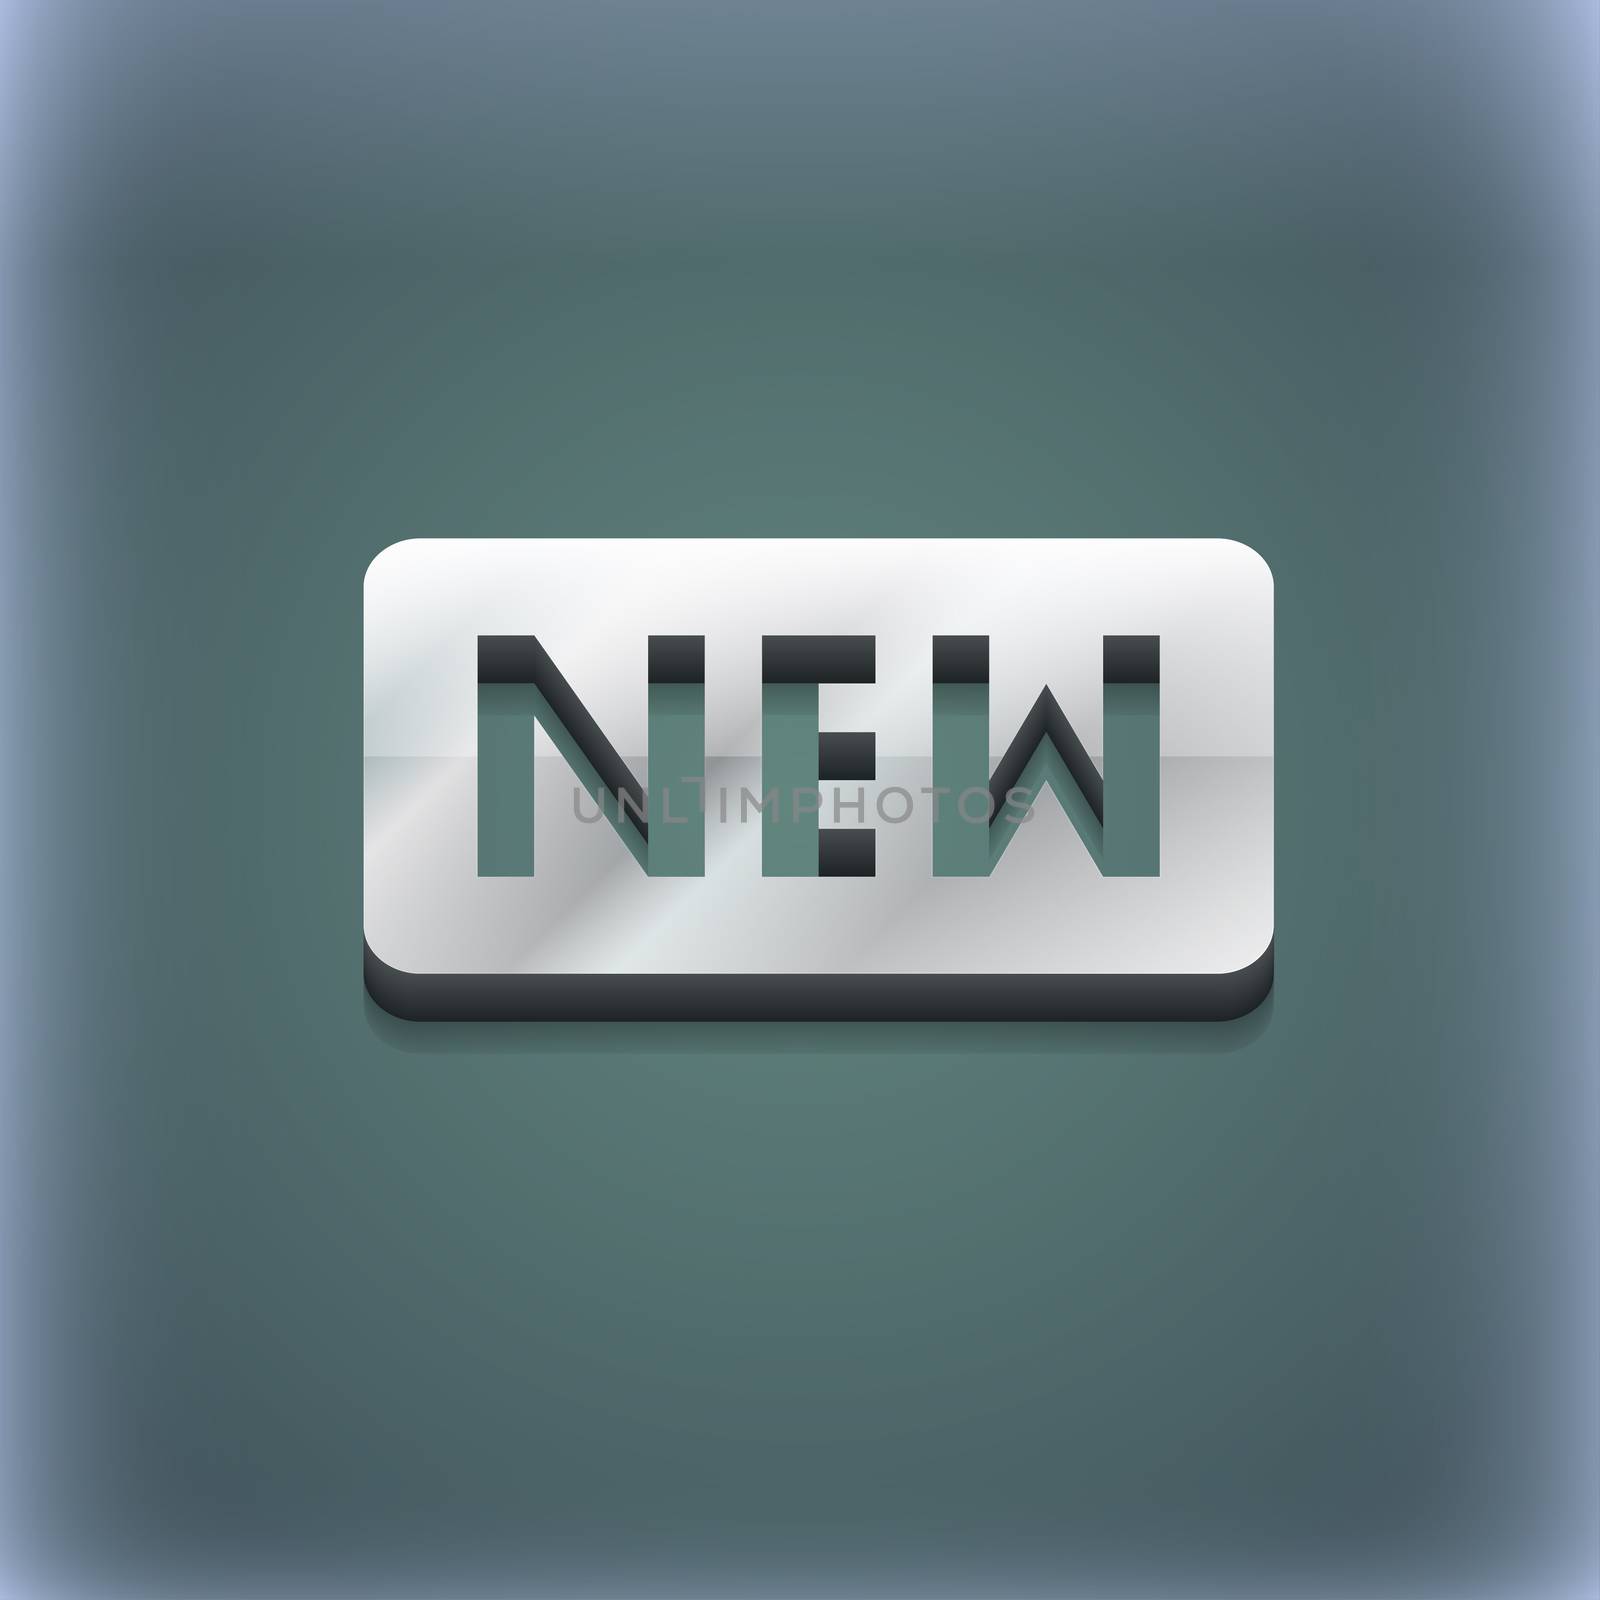 New icon symbol. 3D style. Trendy, modern design with space for your text illustration. Raster version